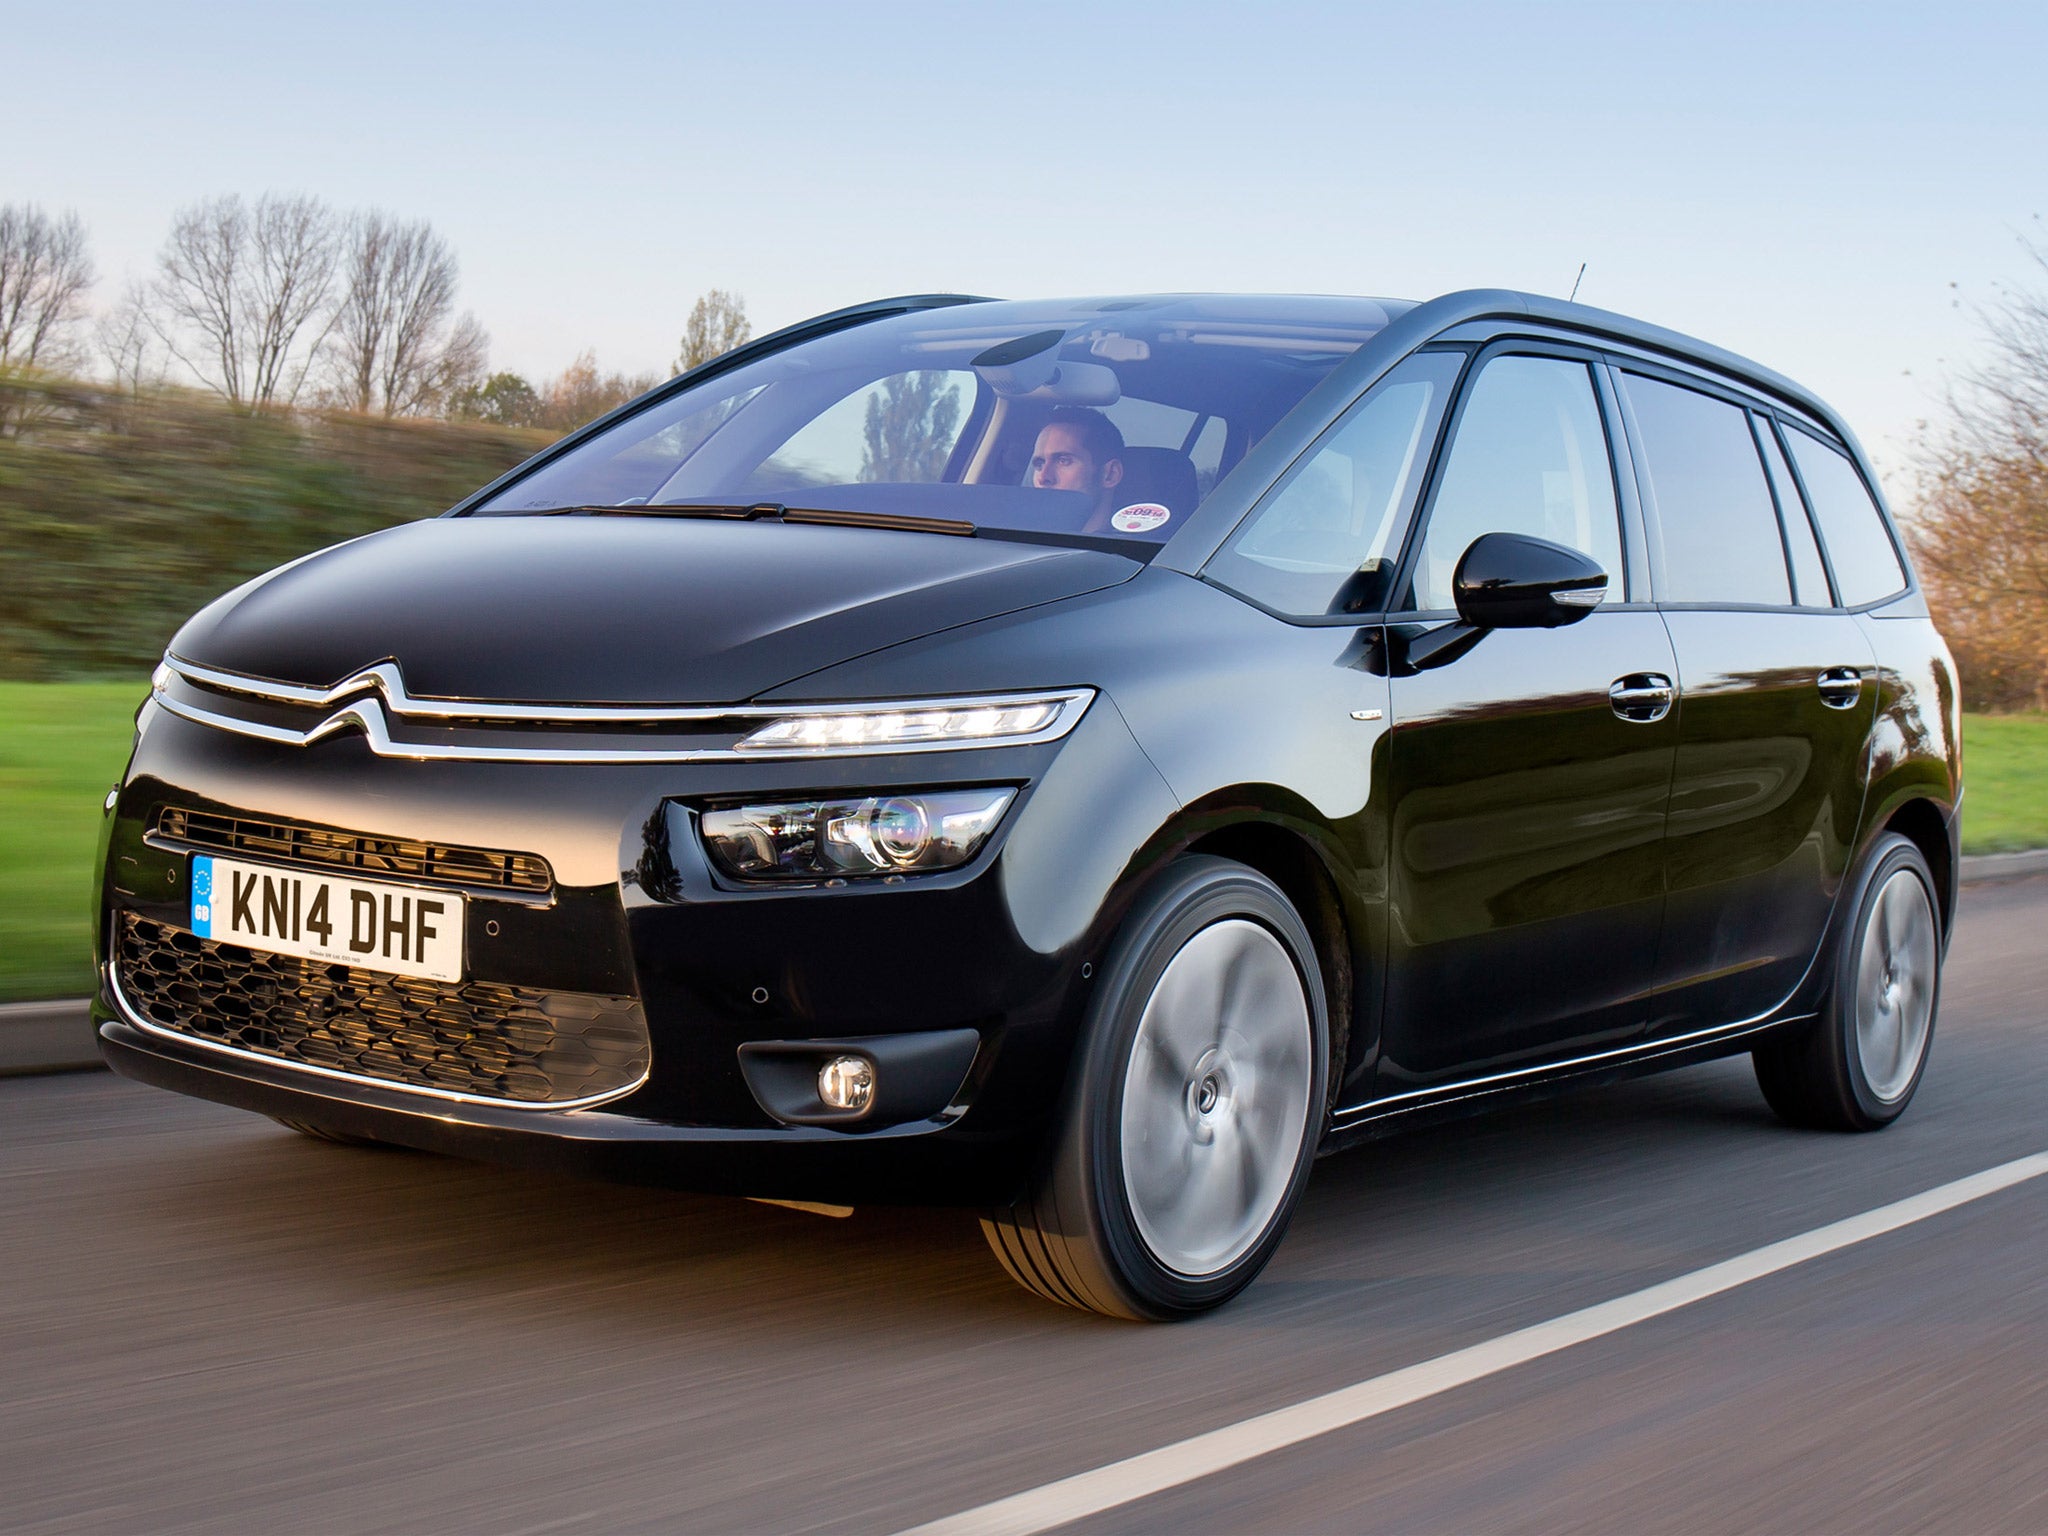 transactie botsen hek Citroën C4 Grand Picasso, motoring review: From family wagons to loft  living - people carriers have evolved | The Independent | The Independent